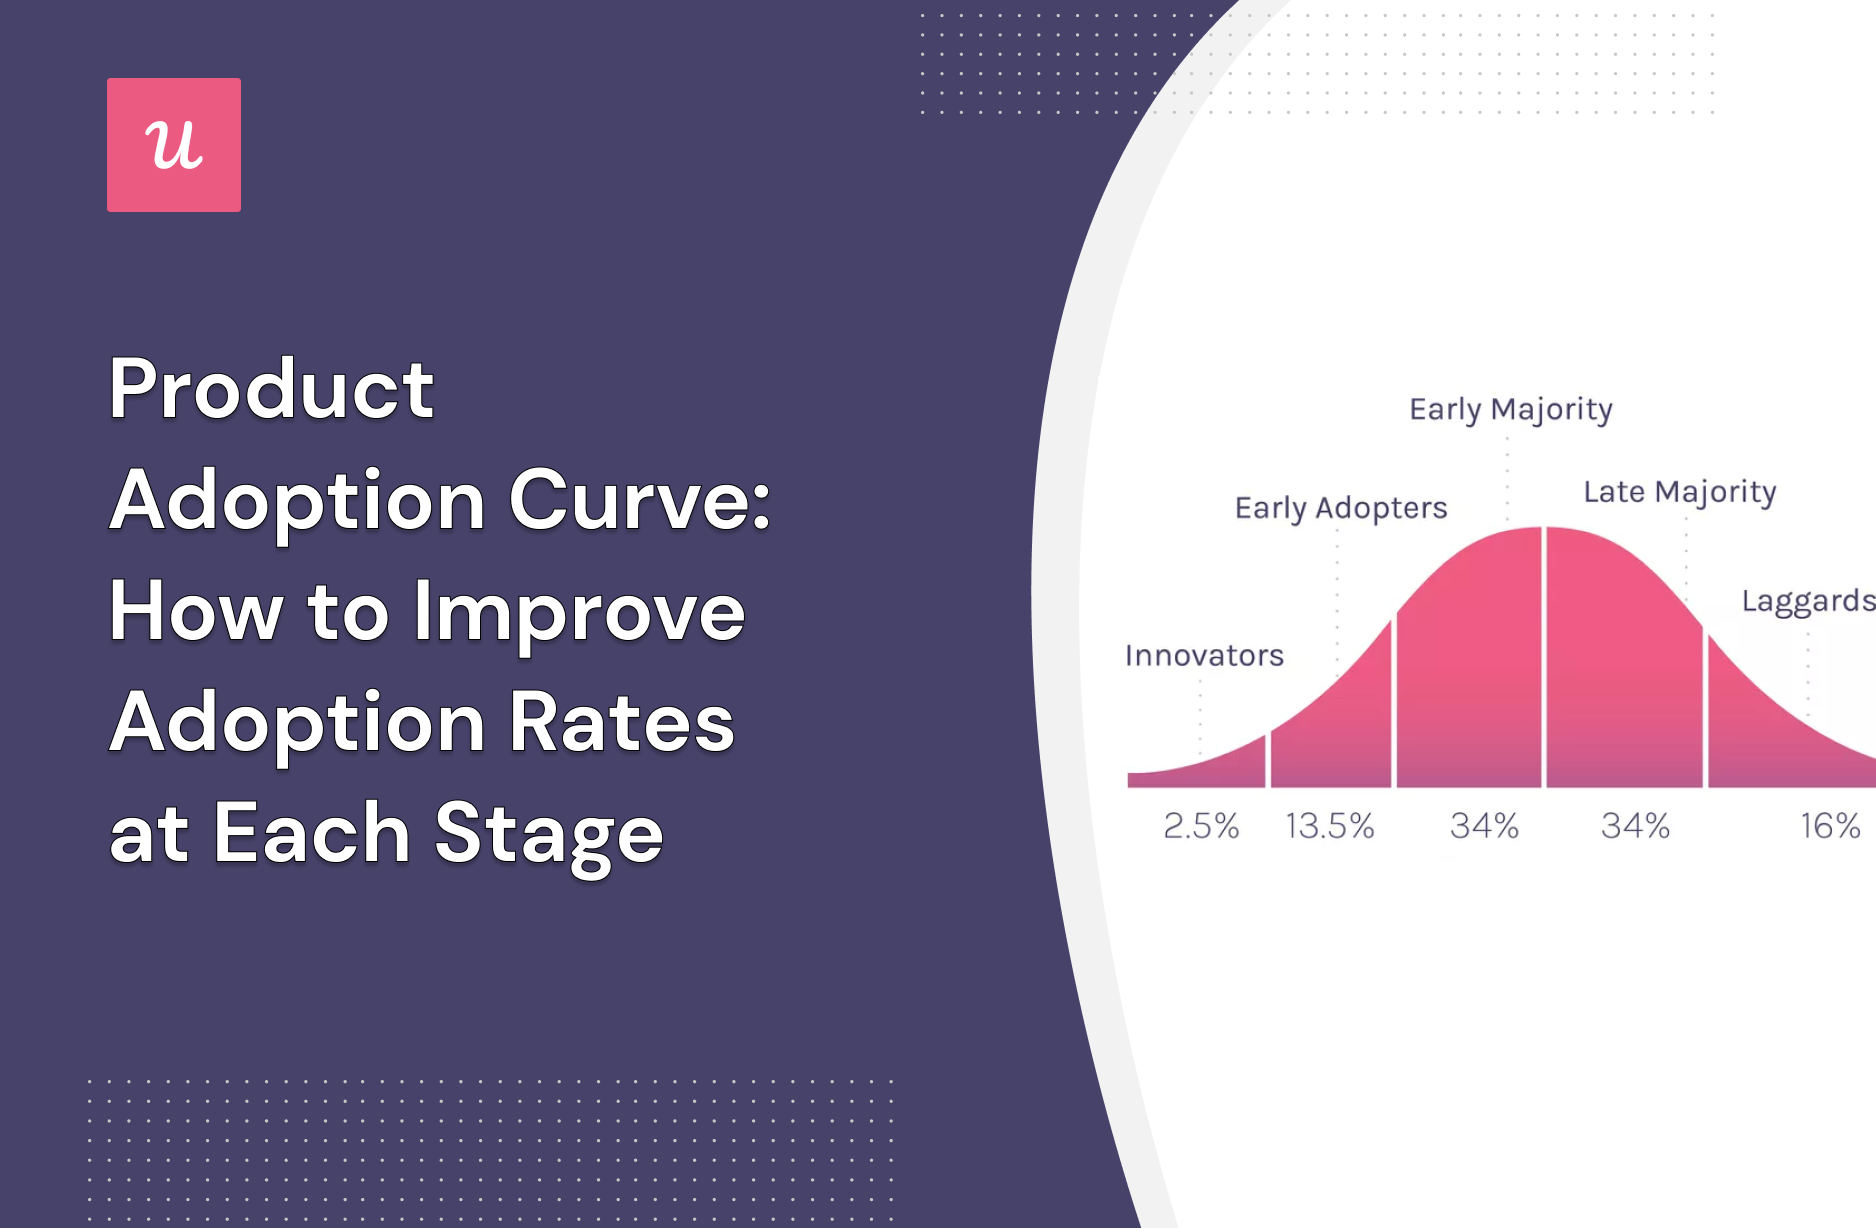 Product Adoption Curve: How to Improve Adoption Rates at Each Stage